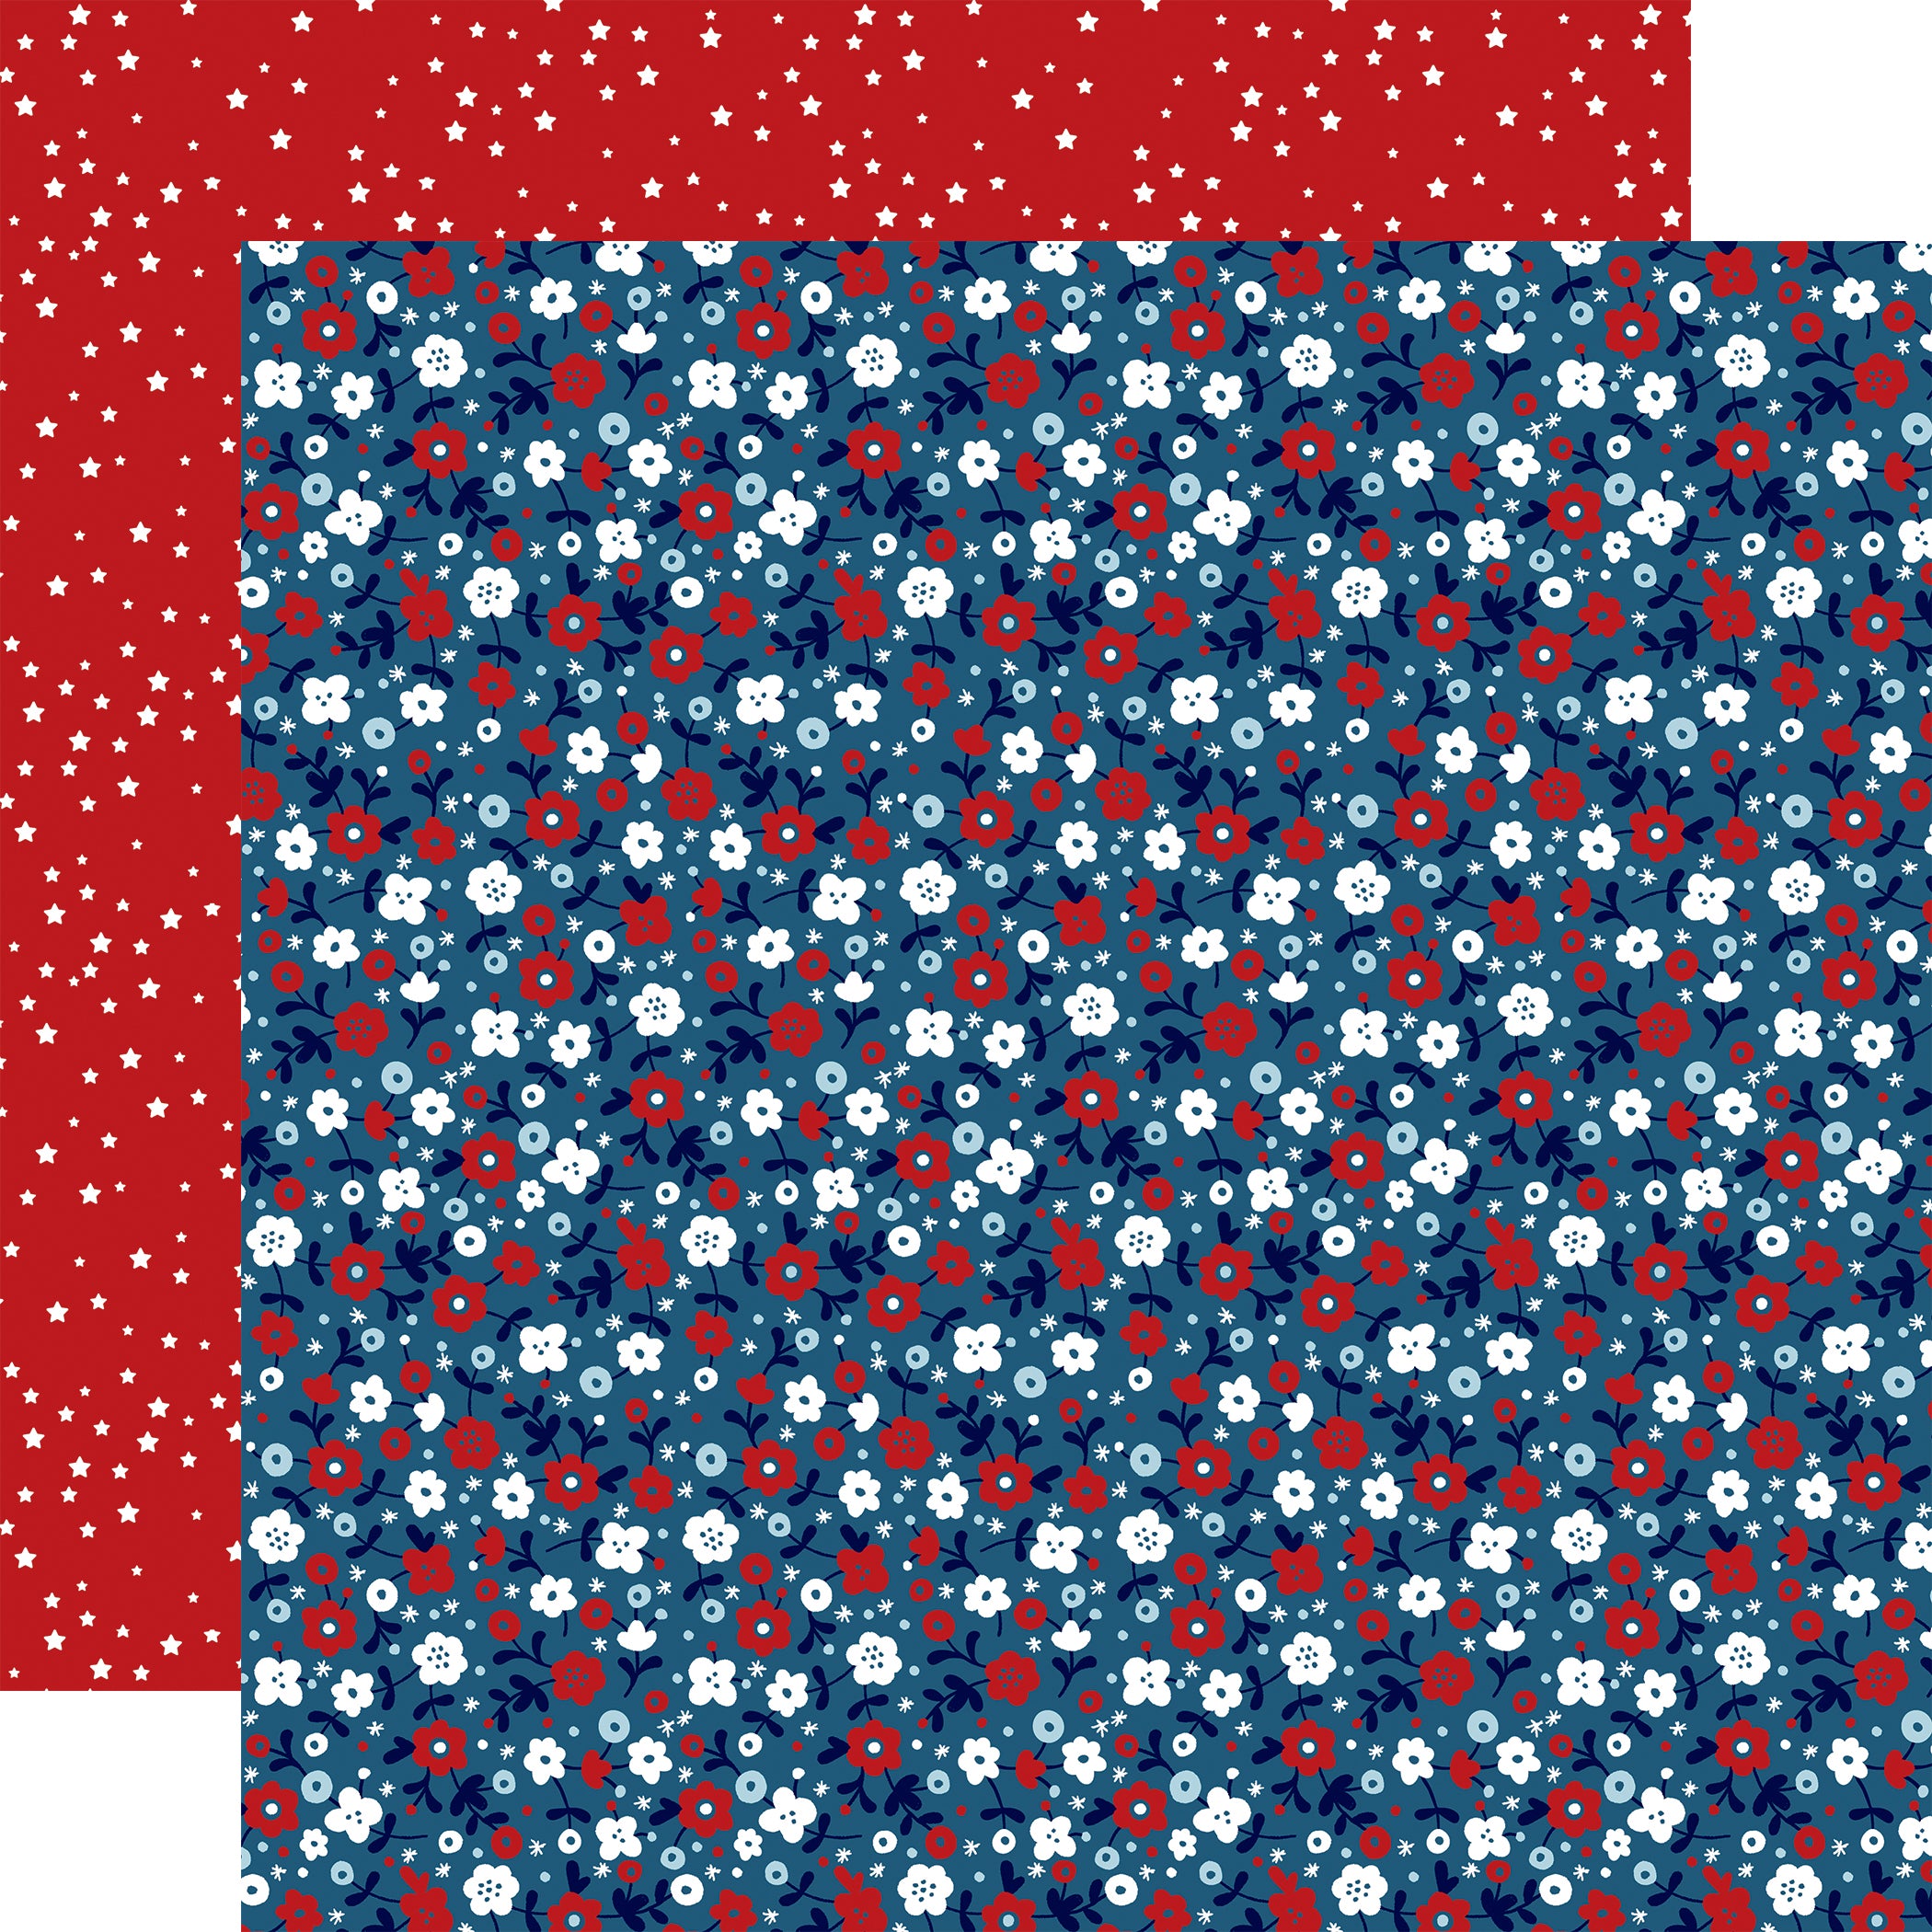 Stars and Stripes Forever Collection Flowers For The Fourth 12 x 12 Double-Sided Scrapbook Paper by Echo Park Paper